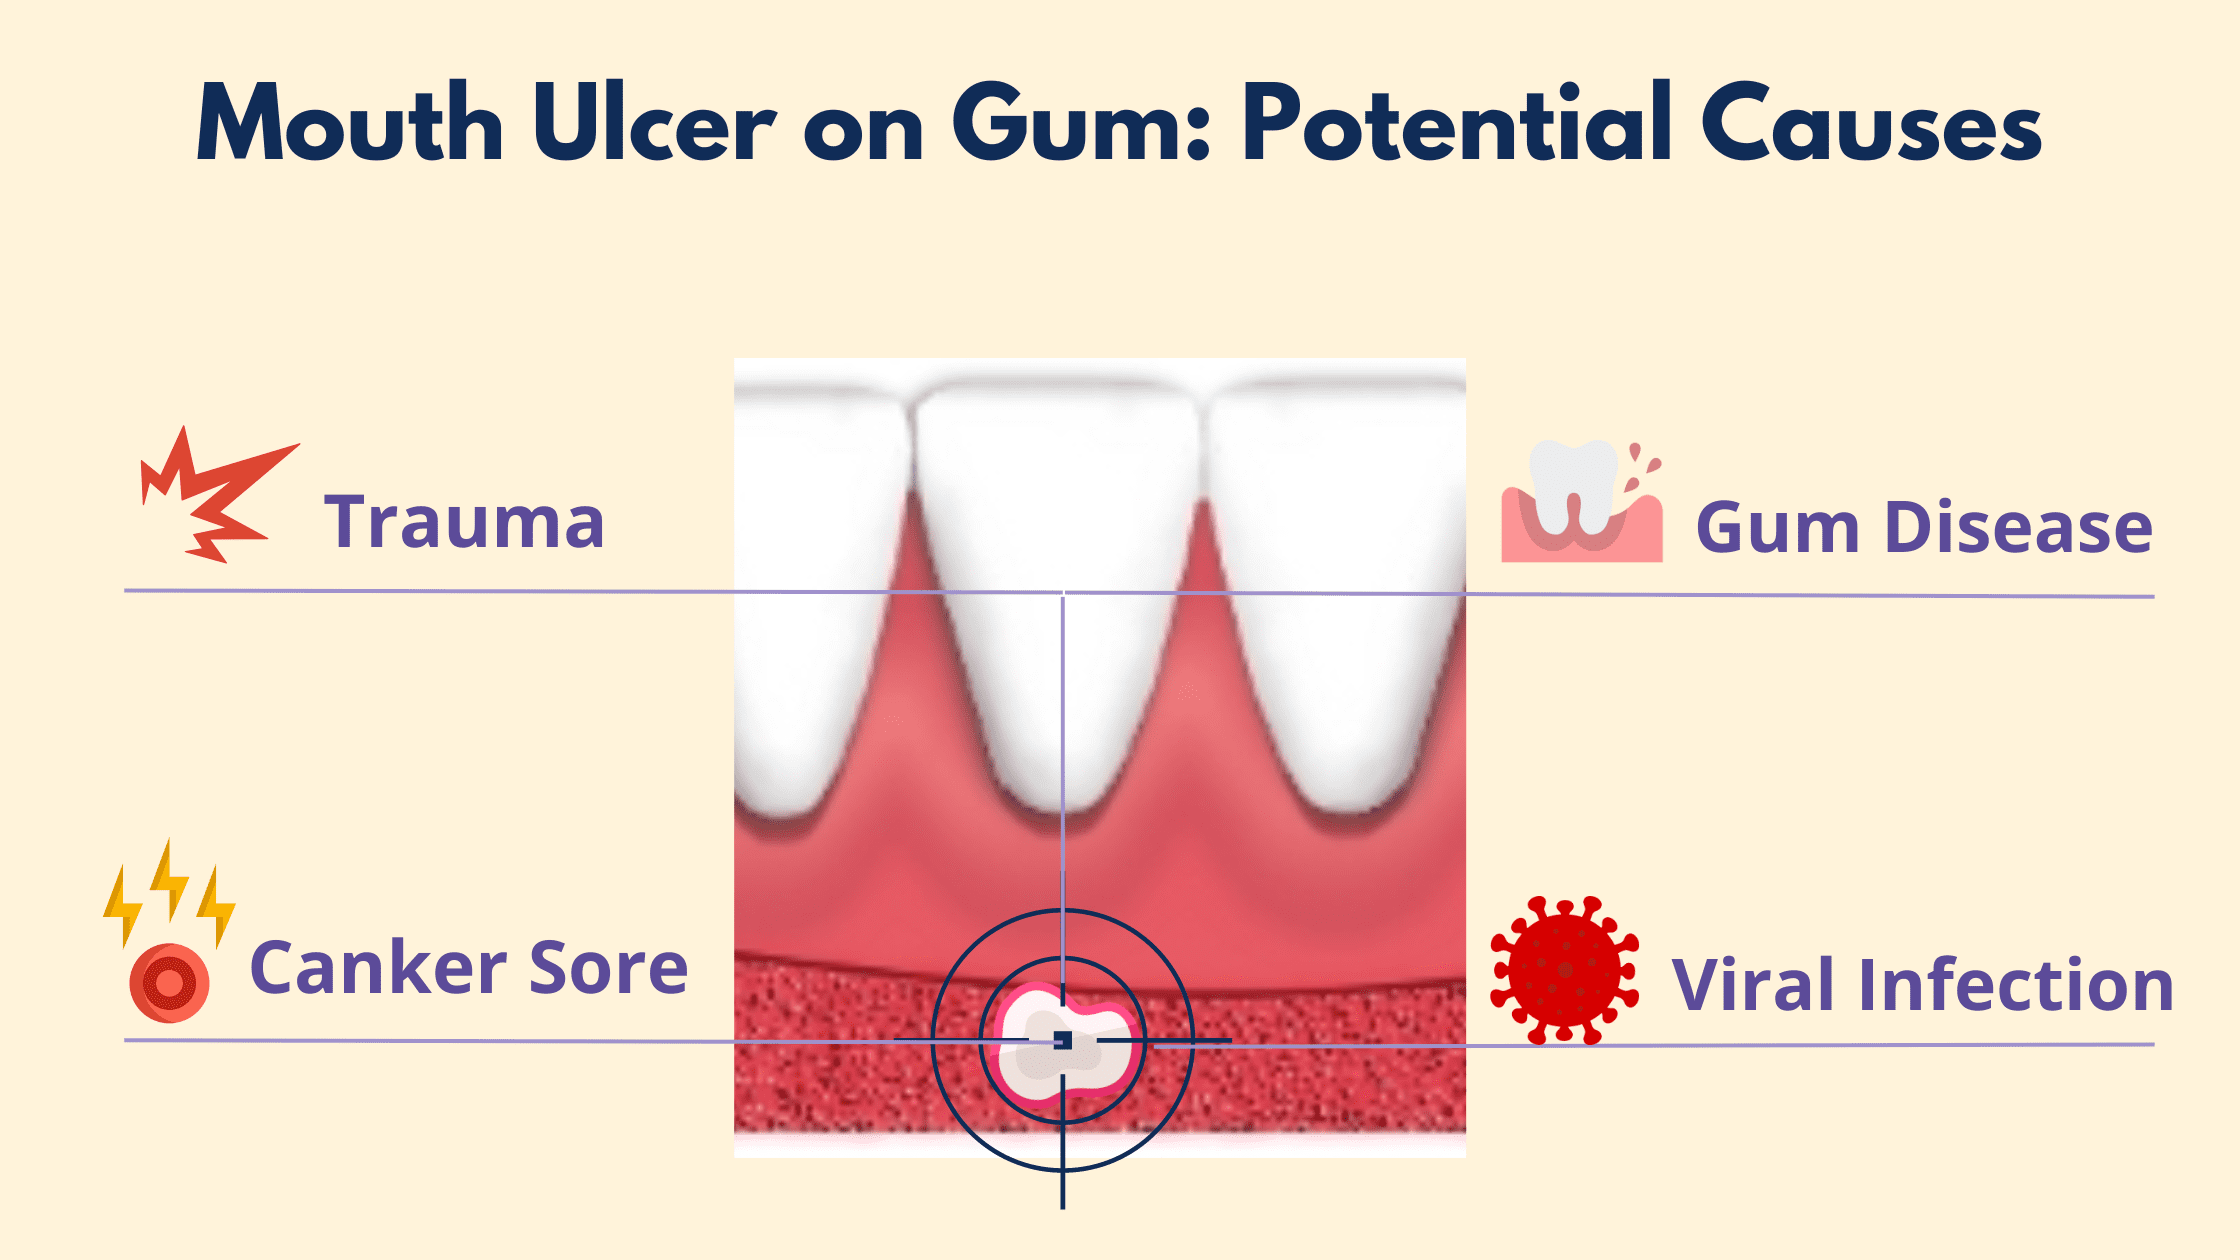 Ulcer on Gum: Potential Causes